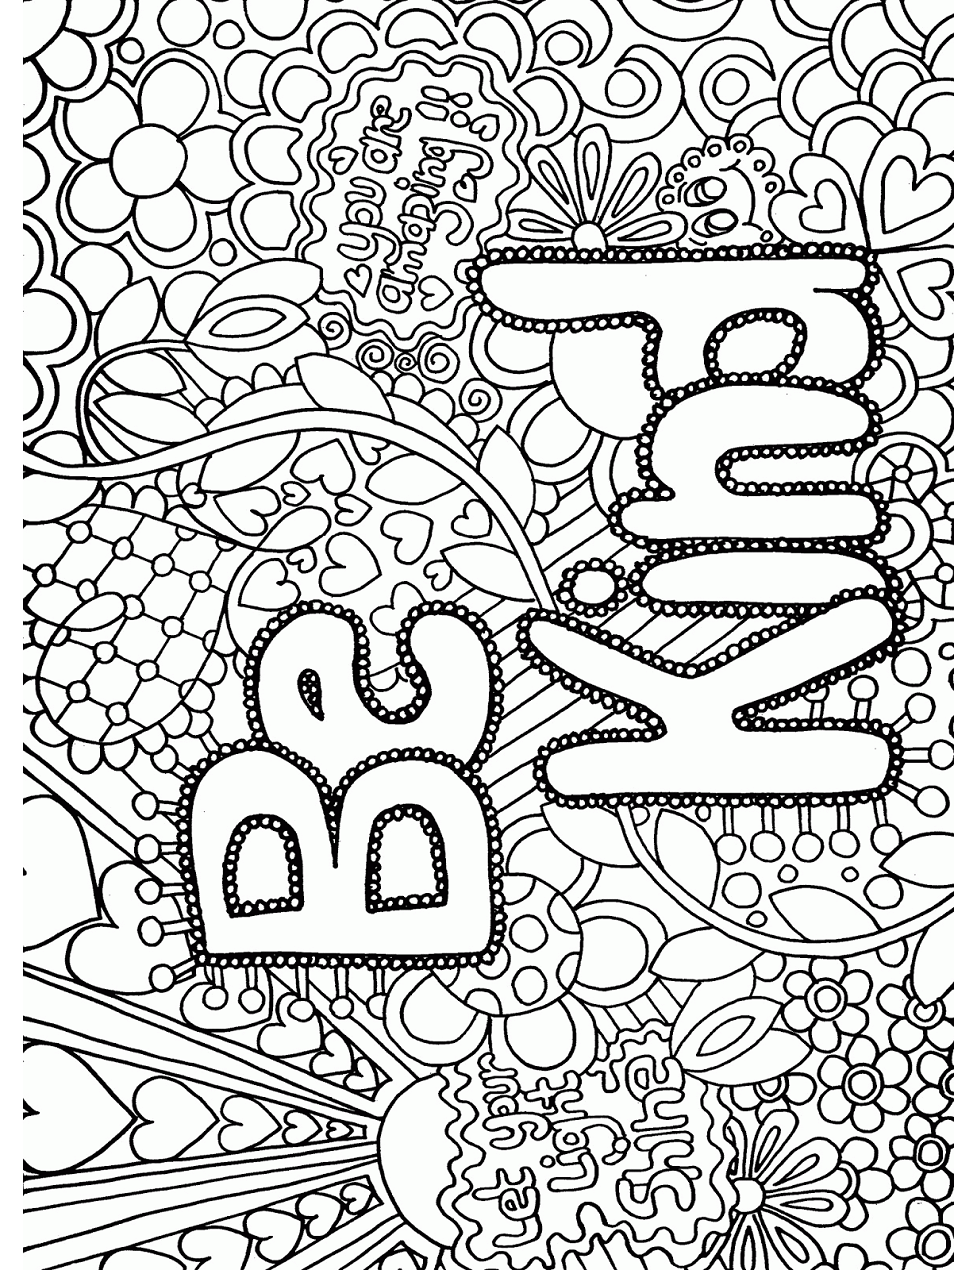 Be Kind Coloring Page